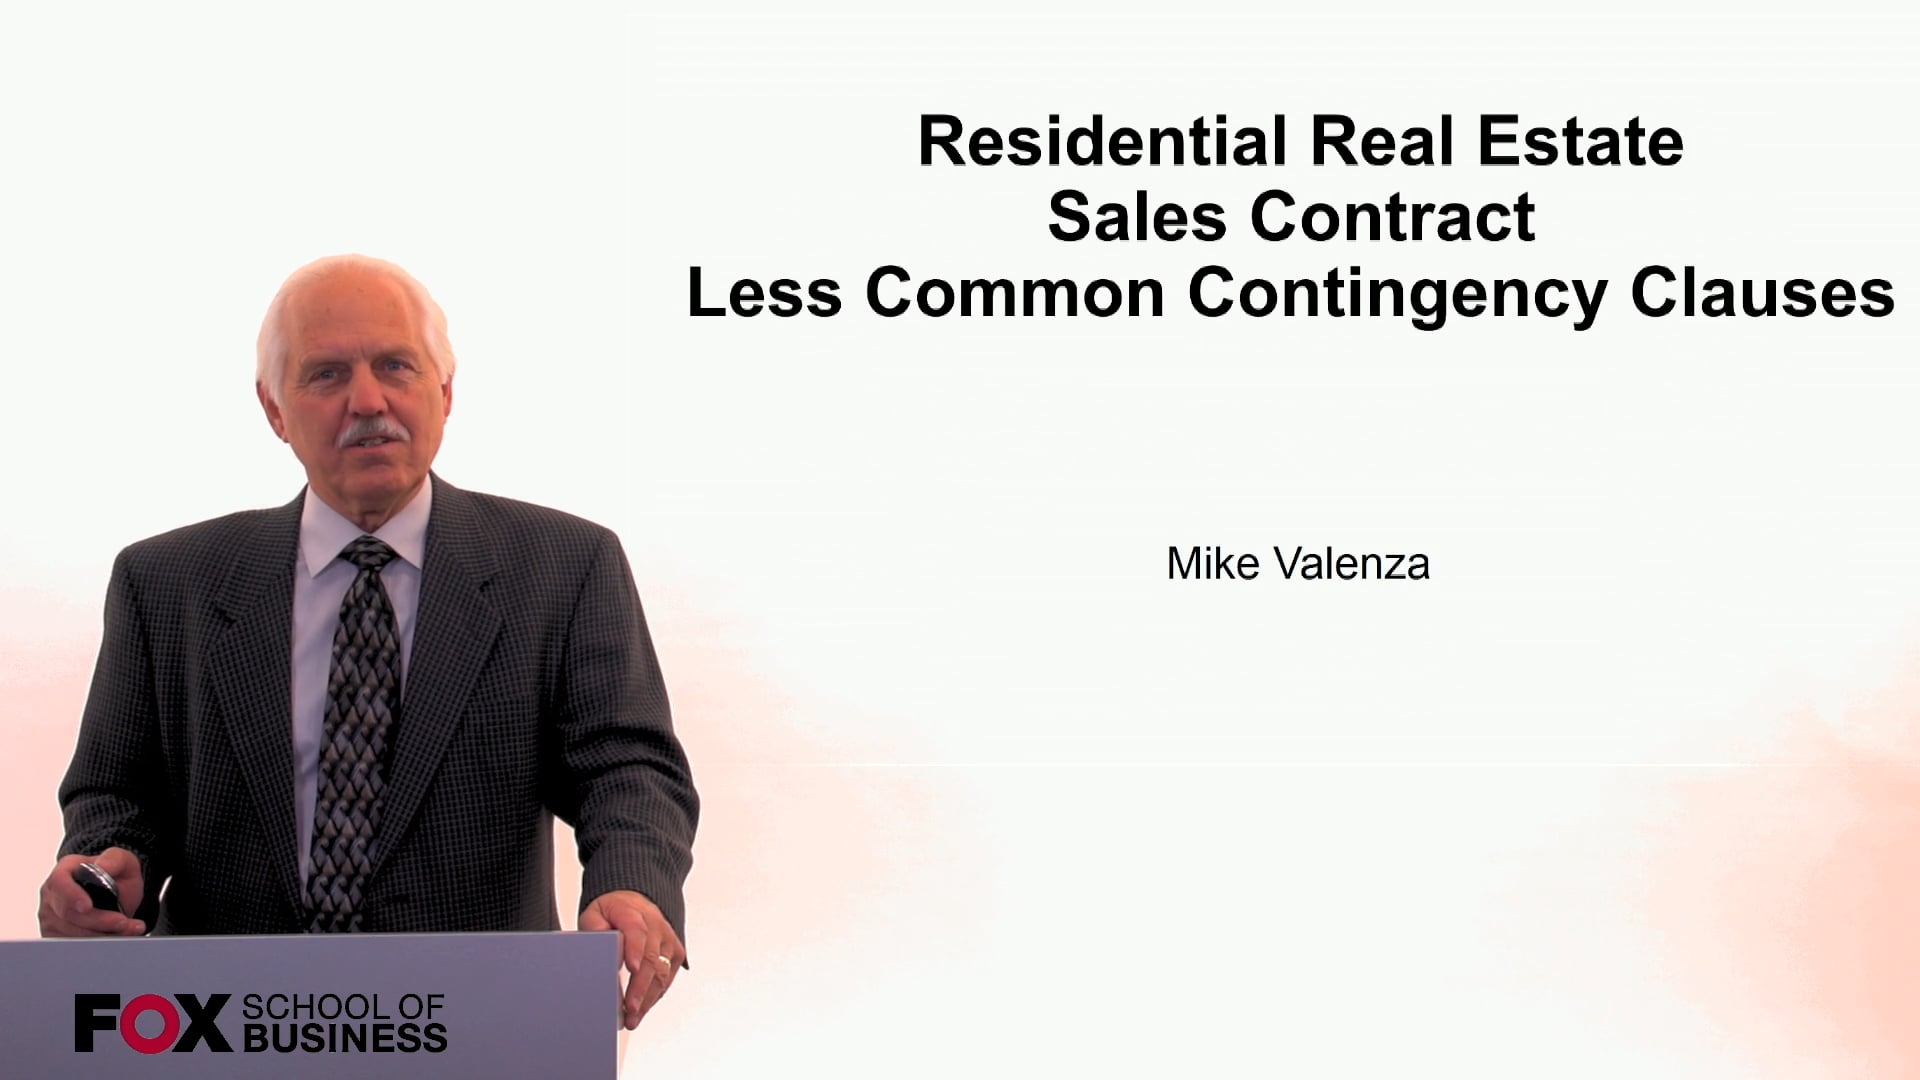 Residential Real Estate Sales Contract Less Common Contingency Clauses